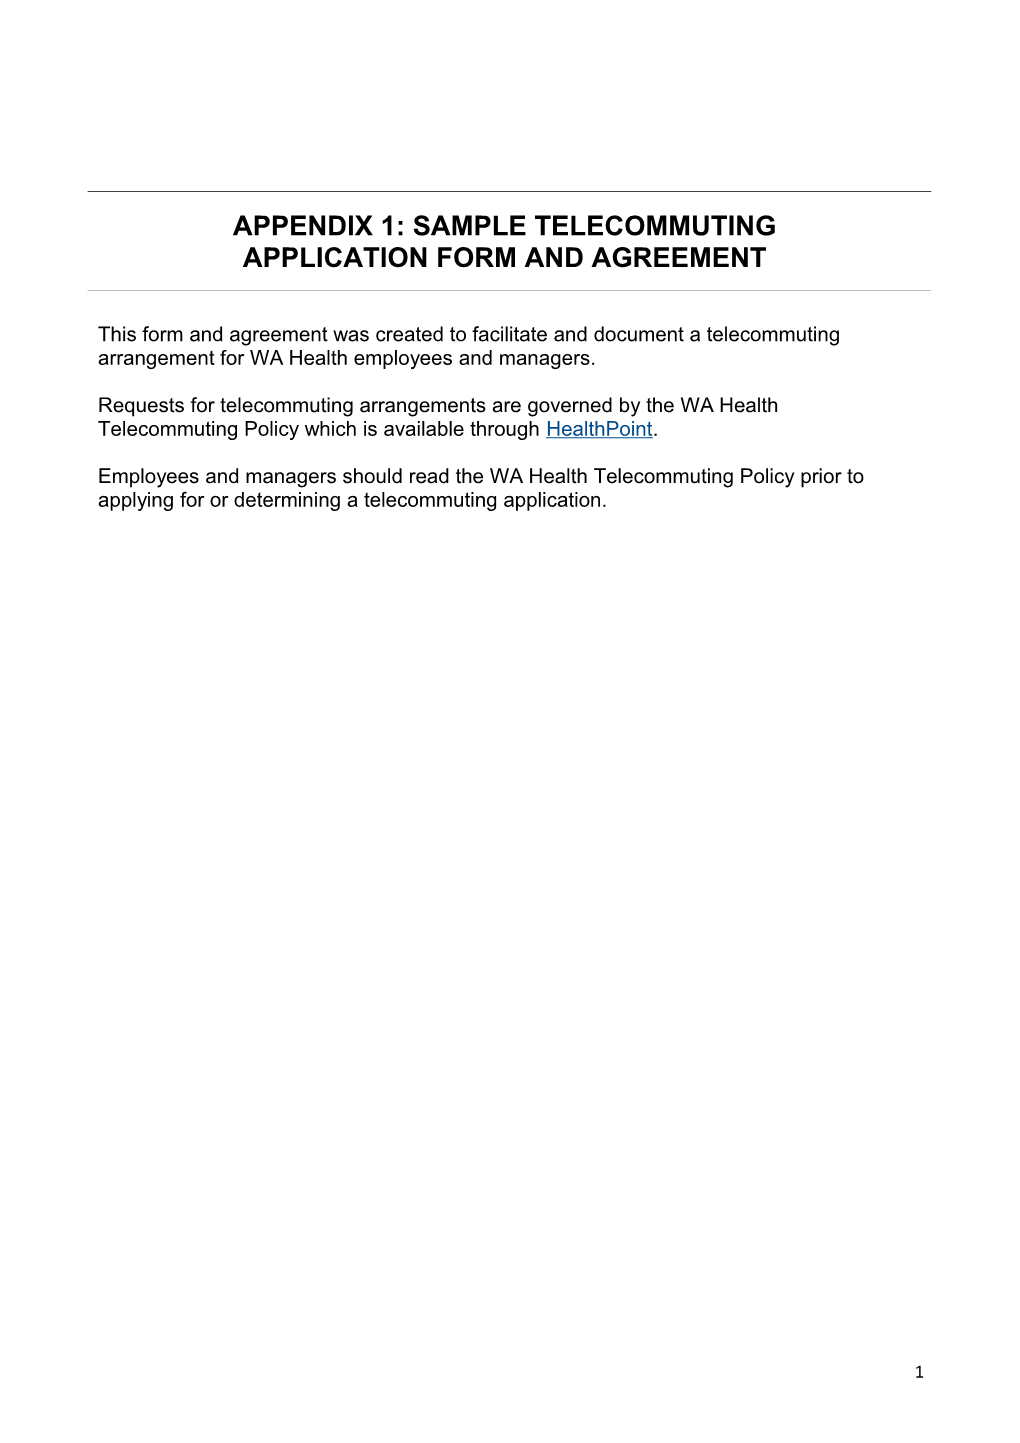 Appendix 1 - Sample Telecommuting Application Form and Agreement